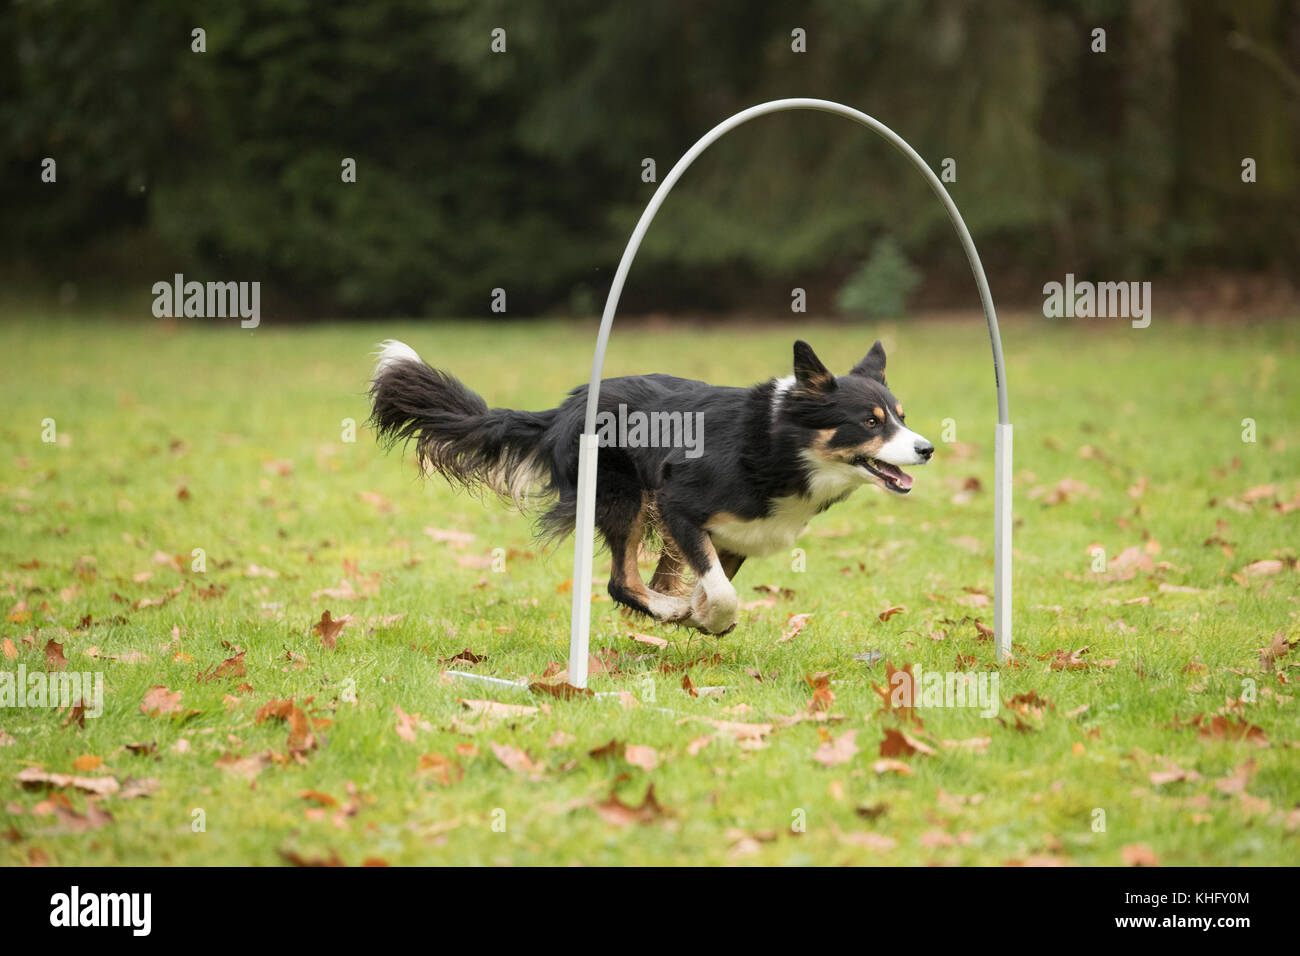 Dog, Border Collie, running in agility competition Stock Photo